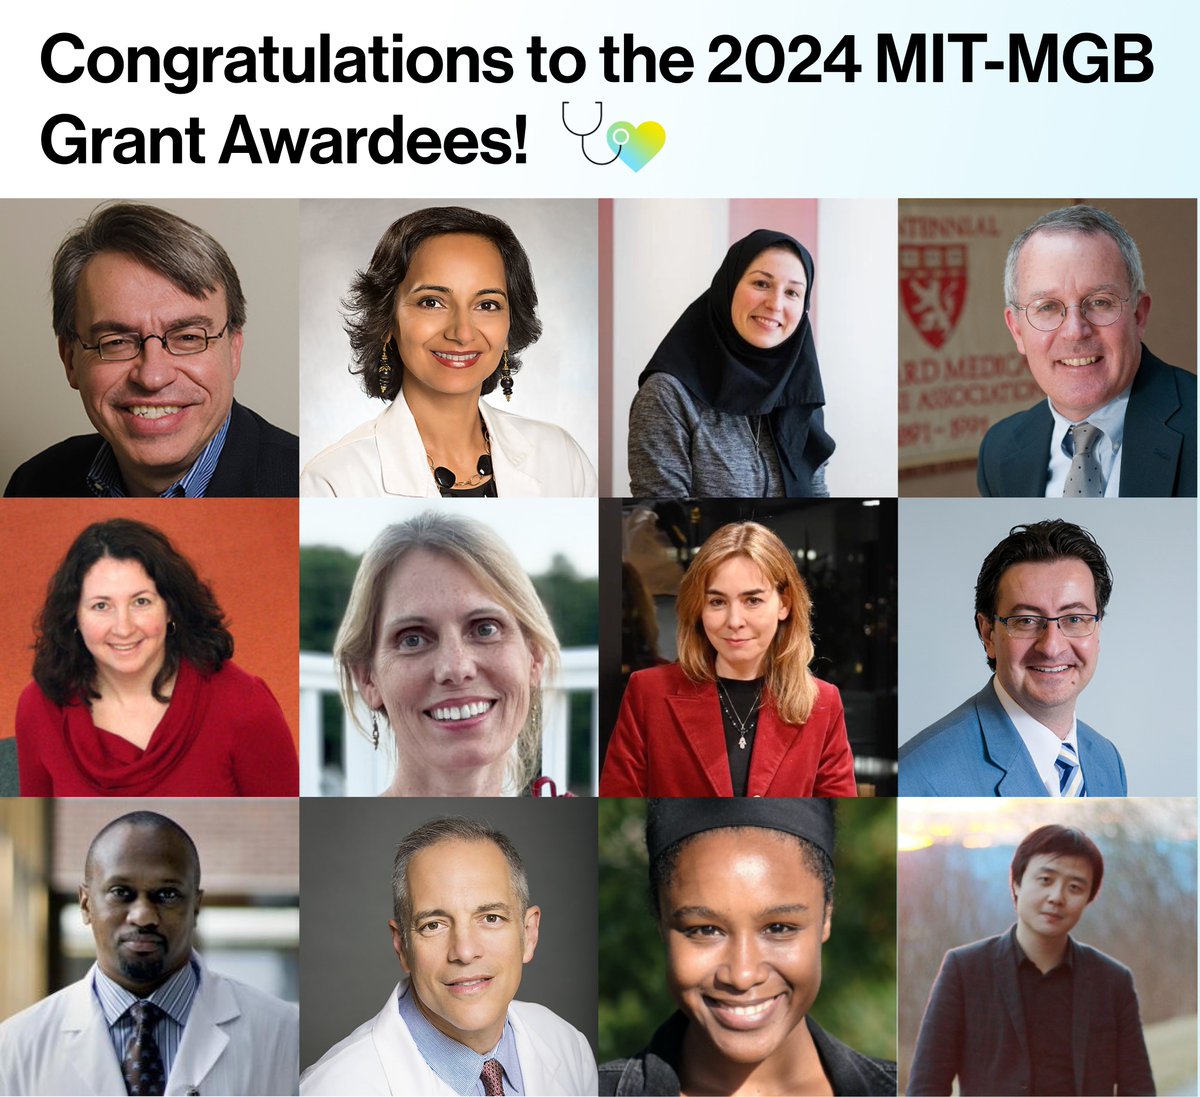 12 awardees will be funded for their groundbreaking projects combining the power of AI and health! We hope this long-standing collaboration between @MIT and @MassGenBrigham will contribute to the betterment of patient health outcomes and AI-adoption by healthcare systems.